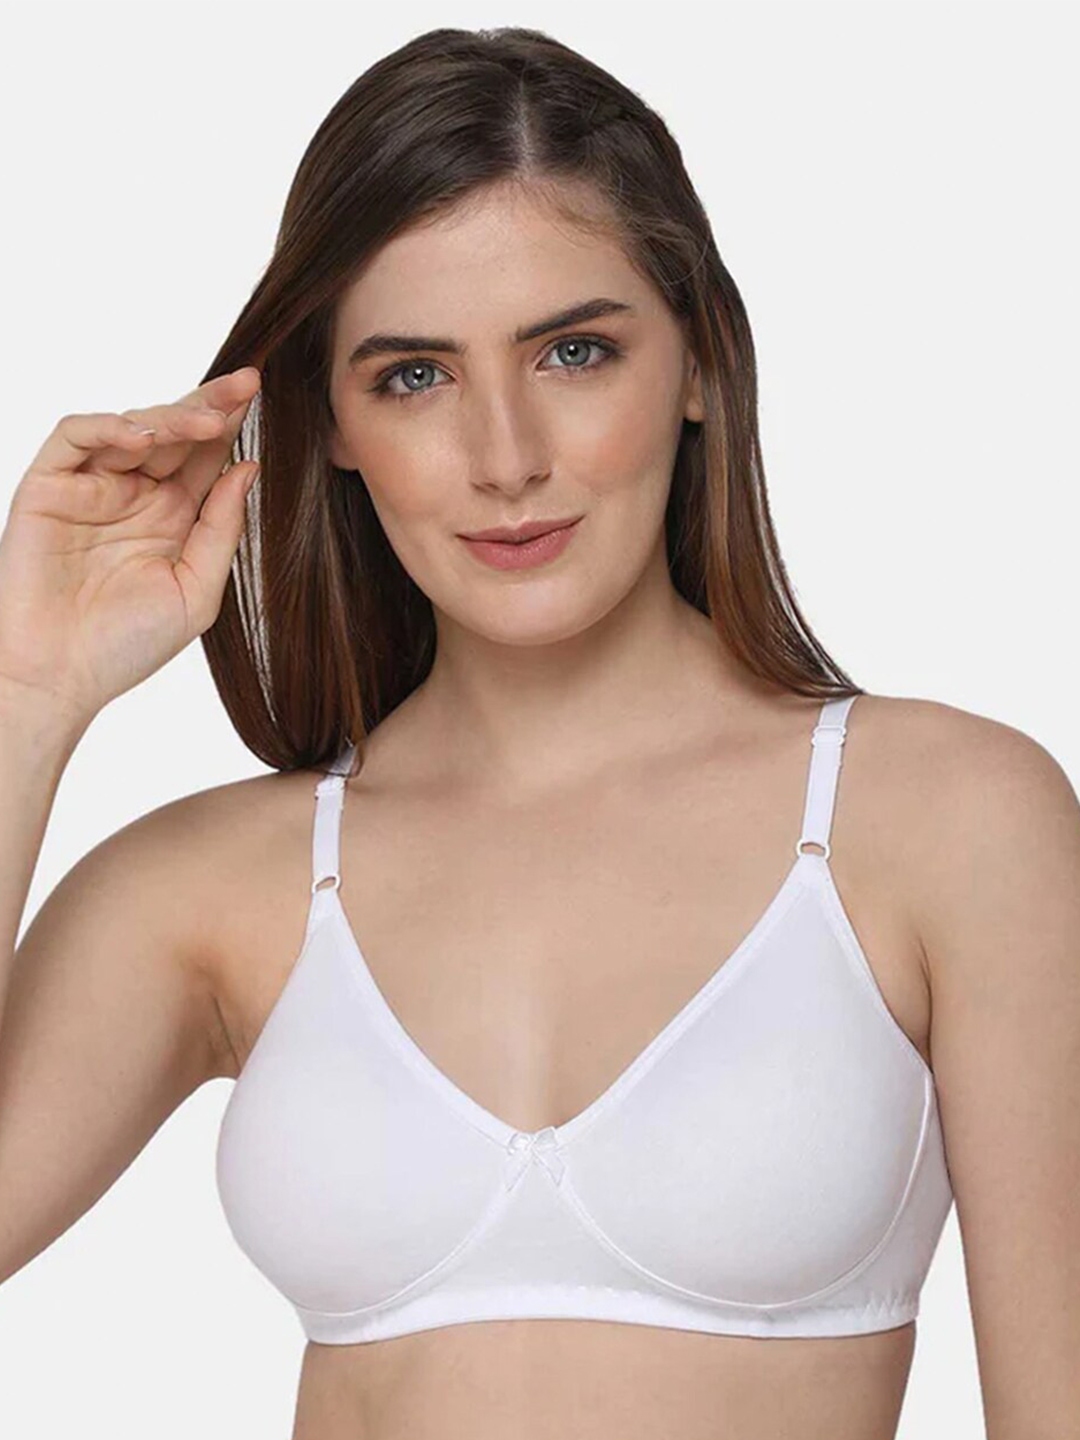 Buy Intimacy LINGERIE Moisture Absorbent Cotton Everyday Bra With